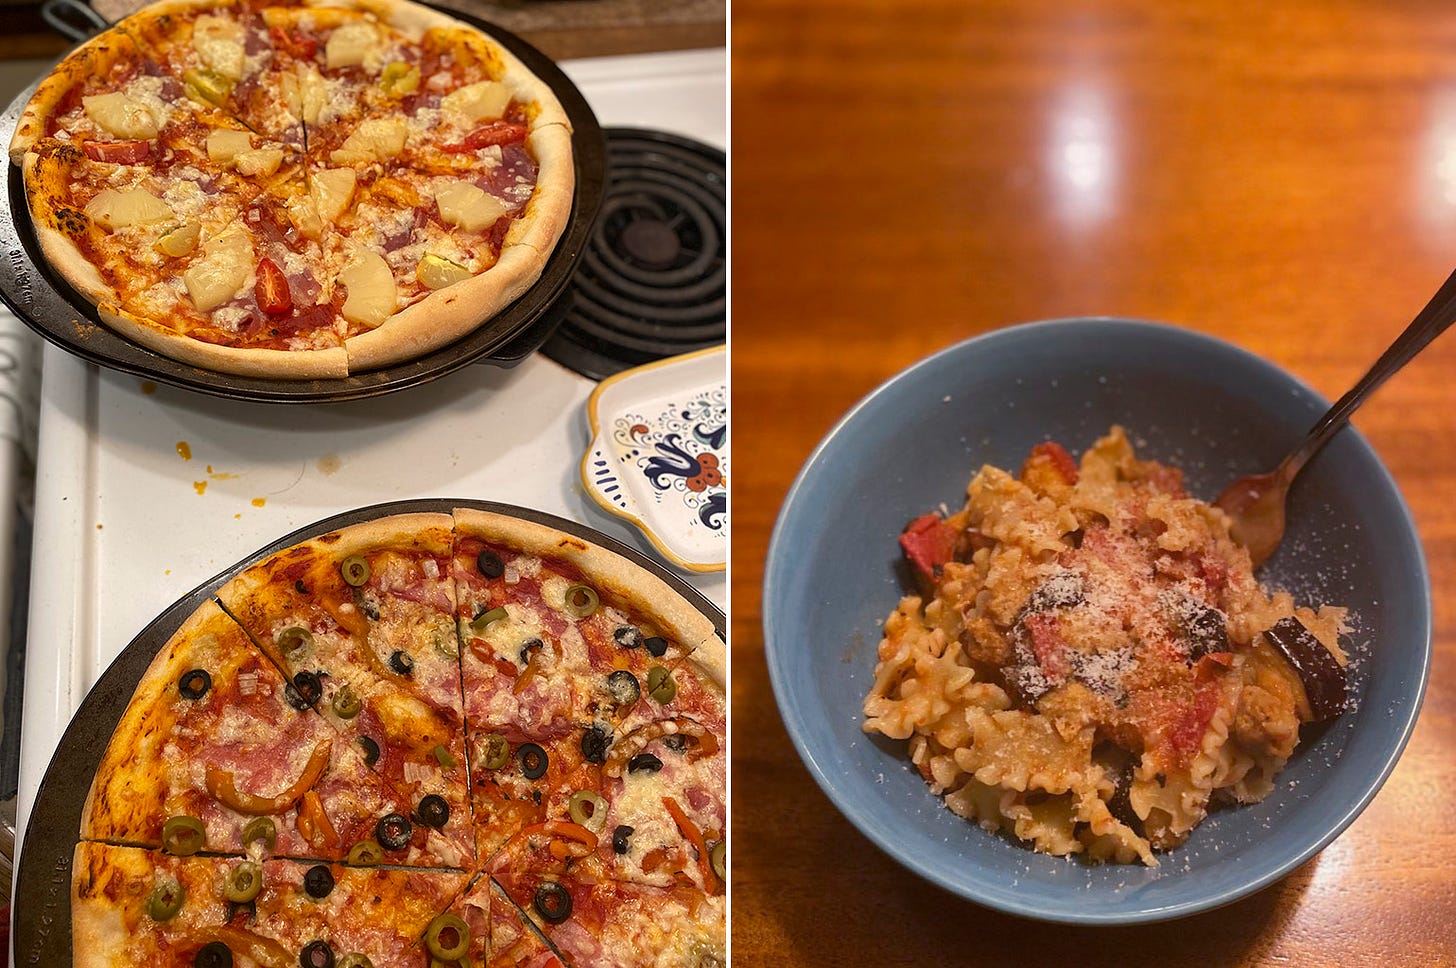 Left image: two pizzas in pans on top of the stove. One is pineapple and prosciutto with tomatoes, and the other is olive with roasted red pepper and capocollo. Right image: a blue bowl of mafalde noodles with pieces of eggplant and tomato visible in the sauce. Pecorino is dusted over top and a fork sticks out on the right of the bowl.